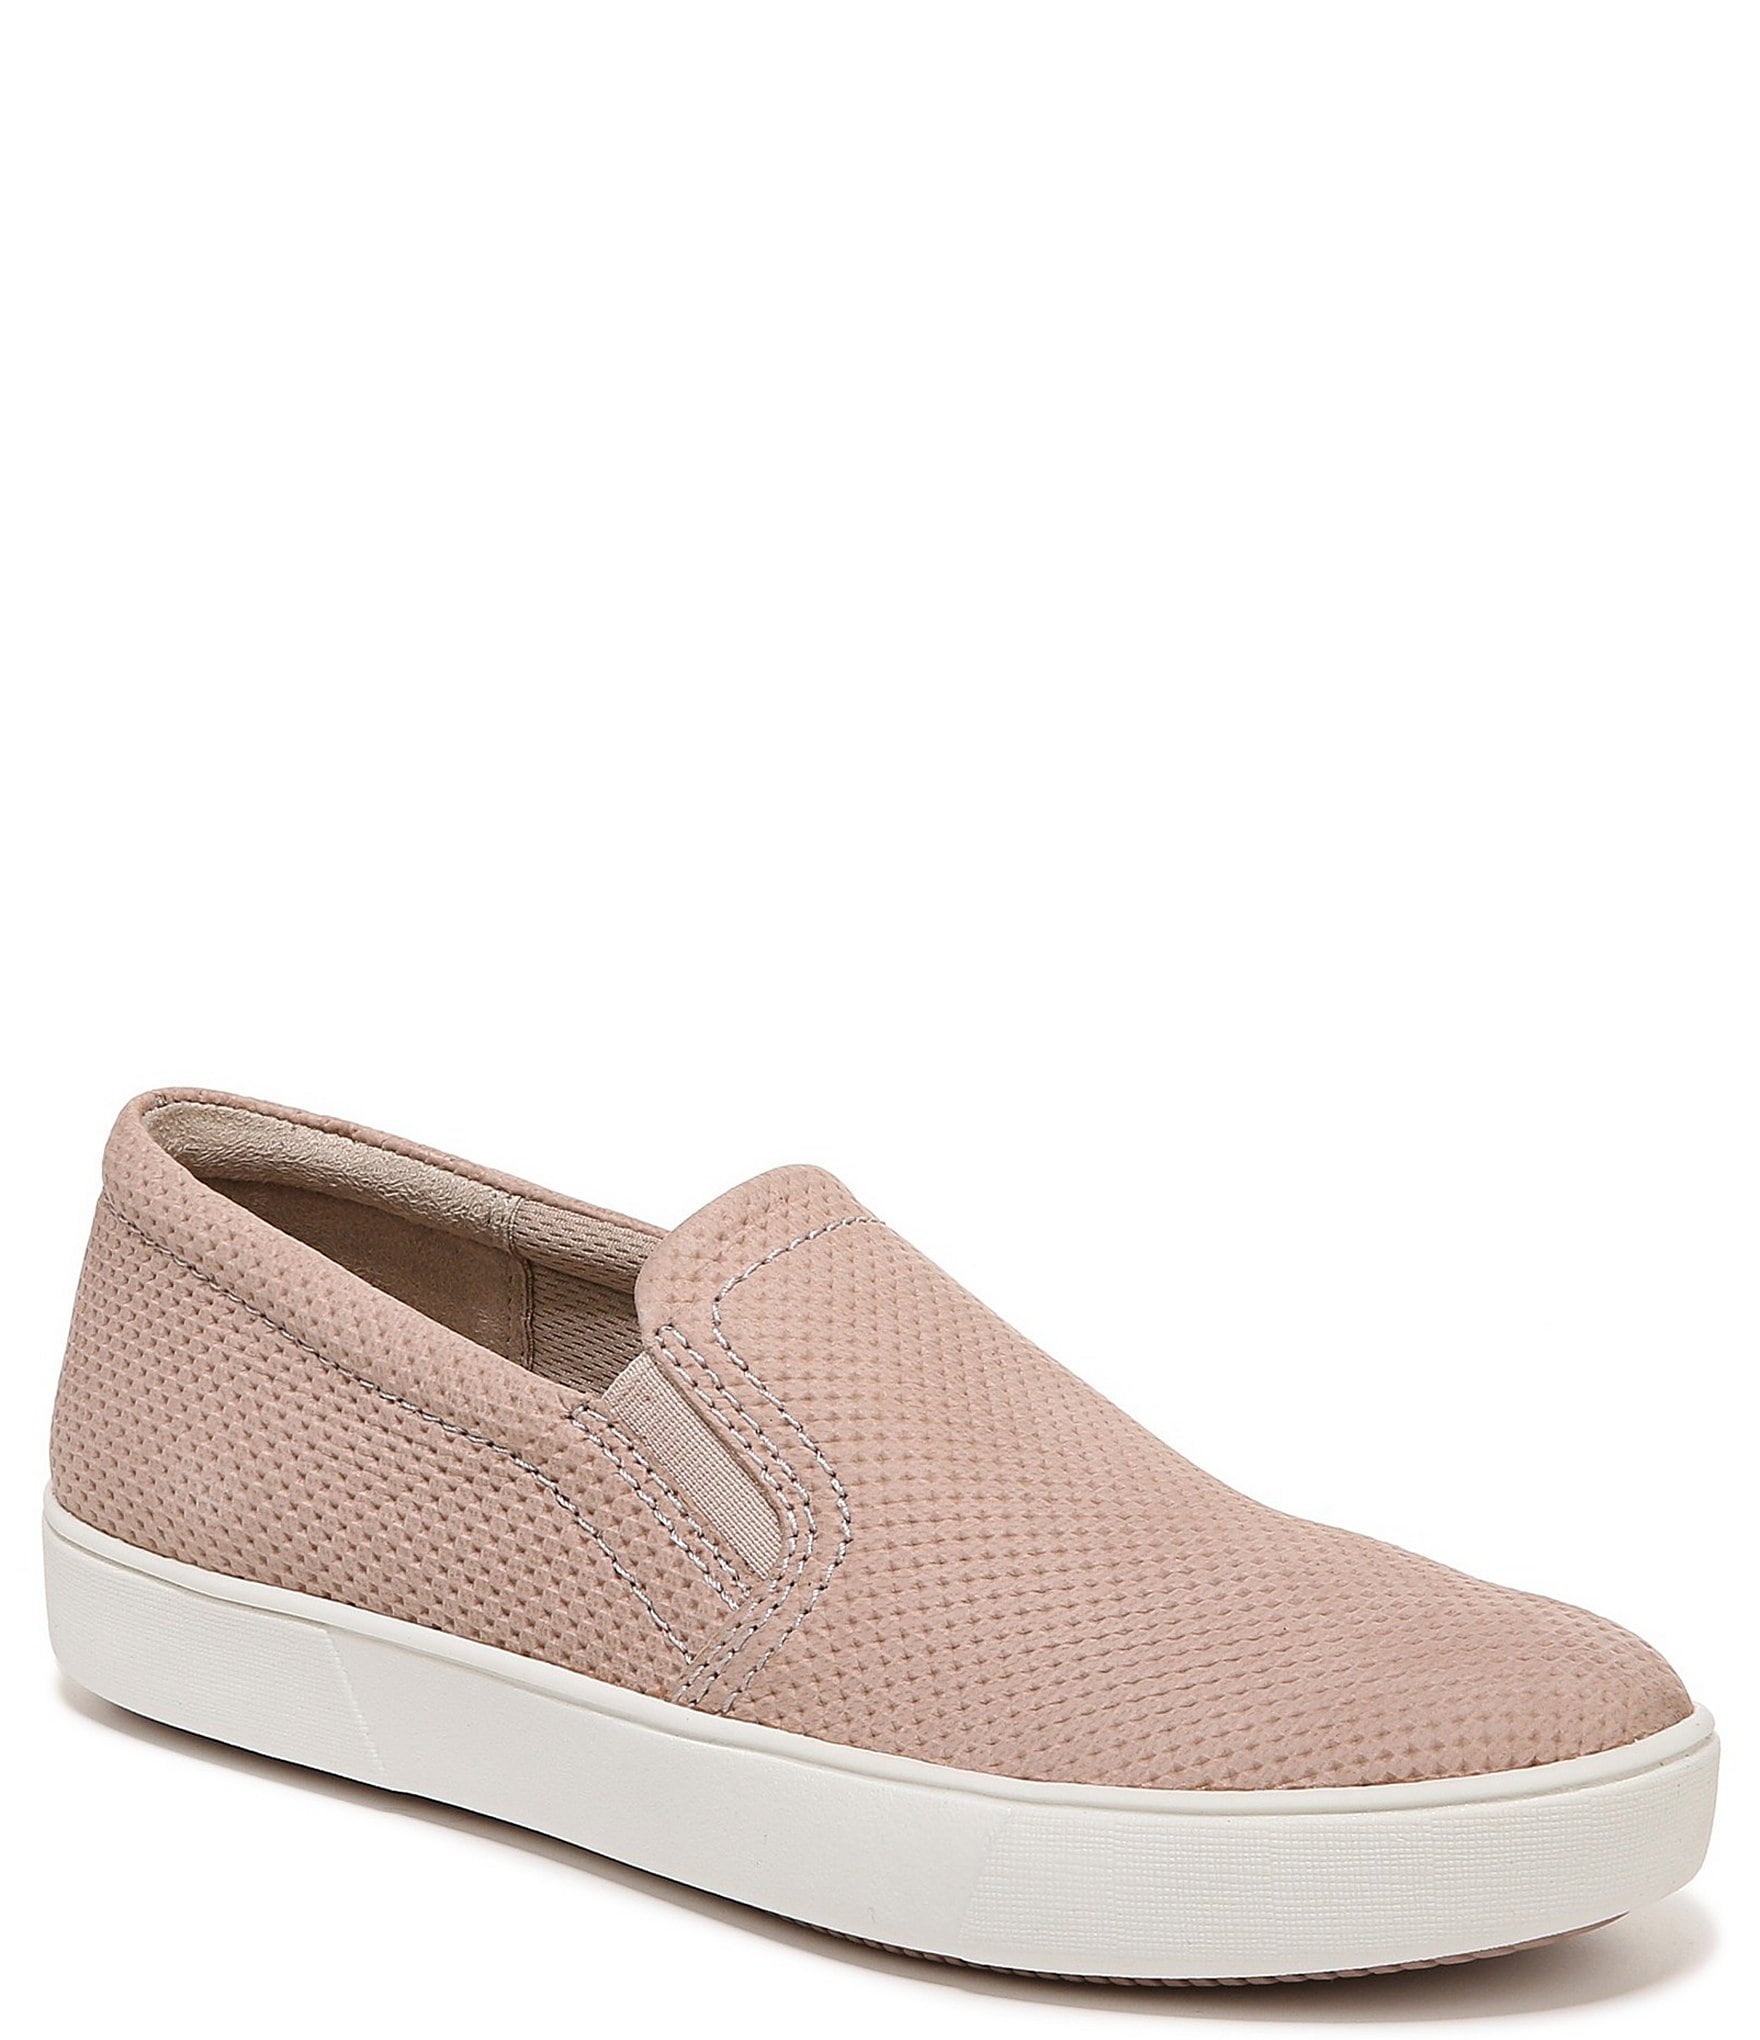 Naturalizer Marianne Perforated Leather Slip-On Sneakers | Dillard's